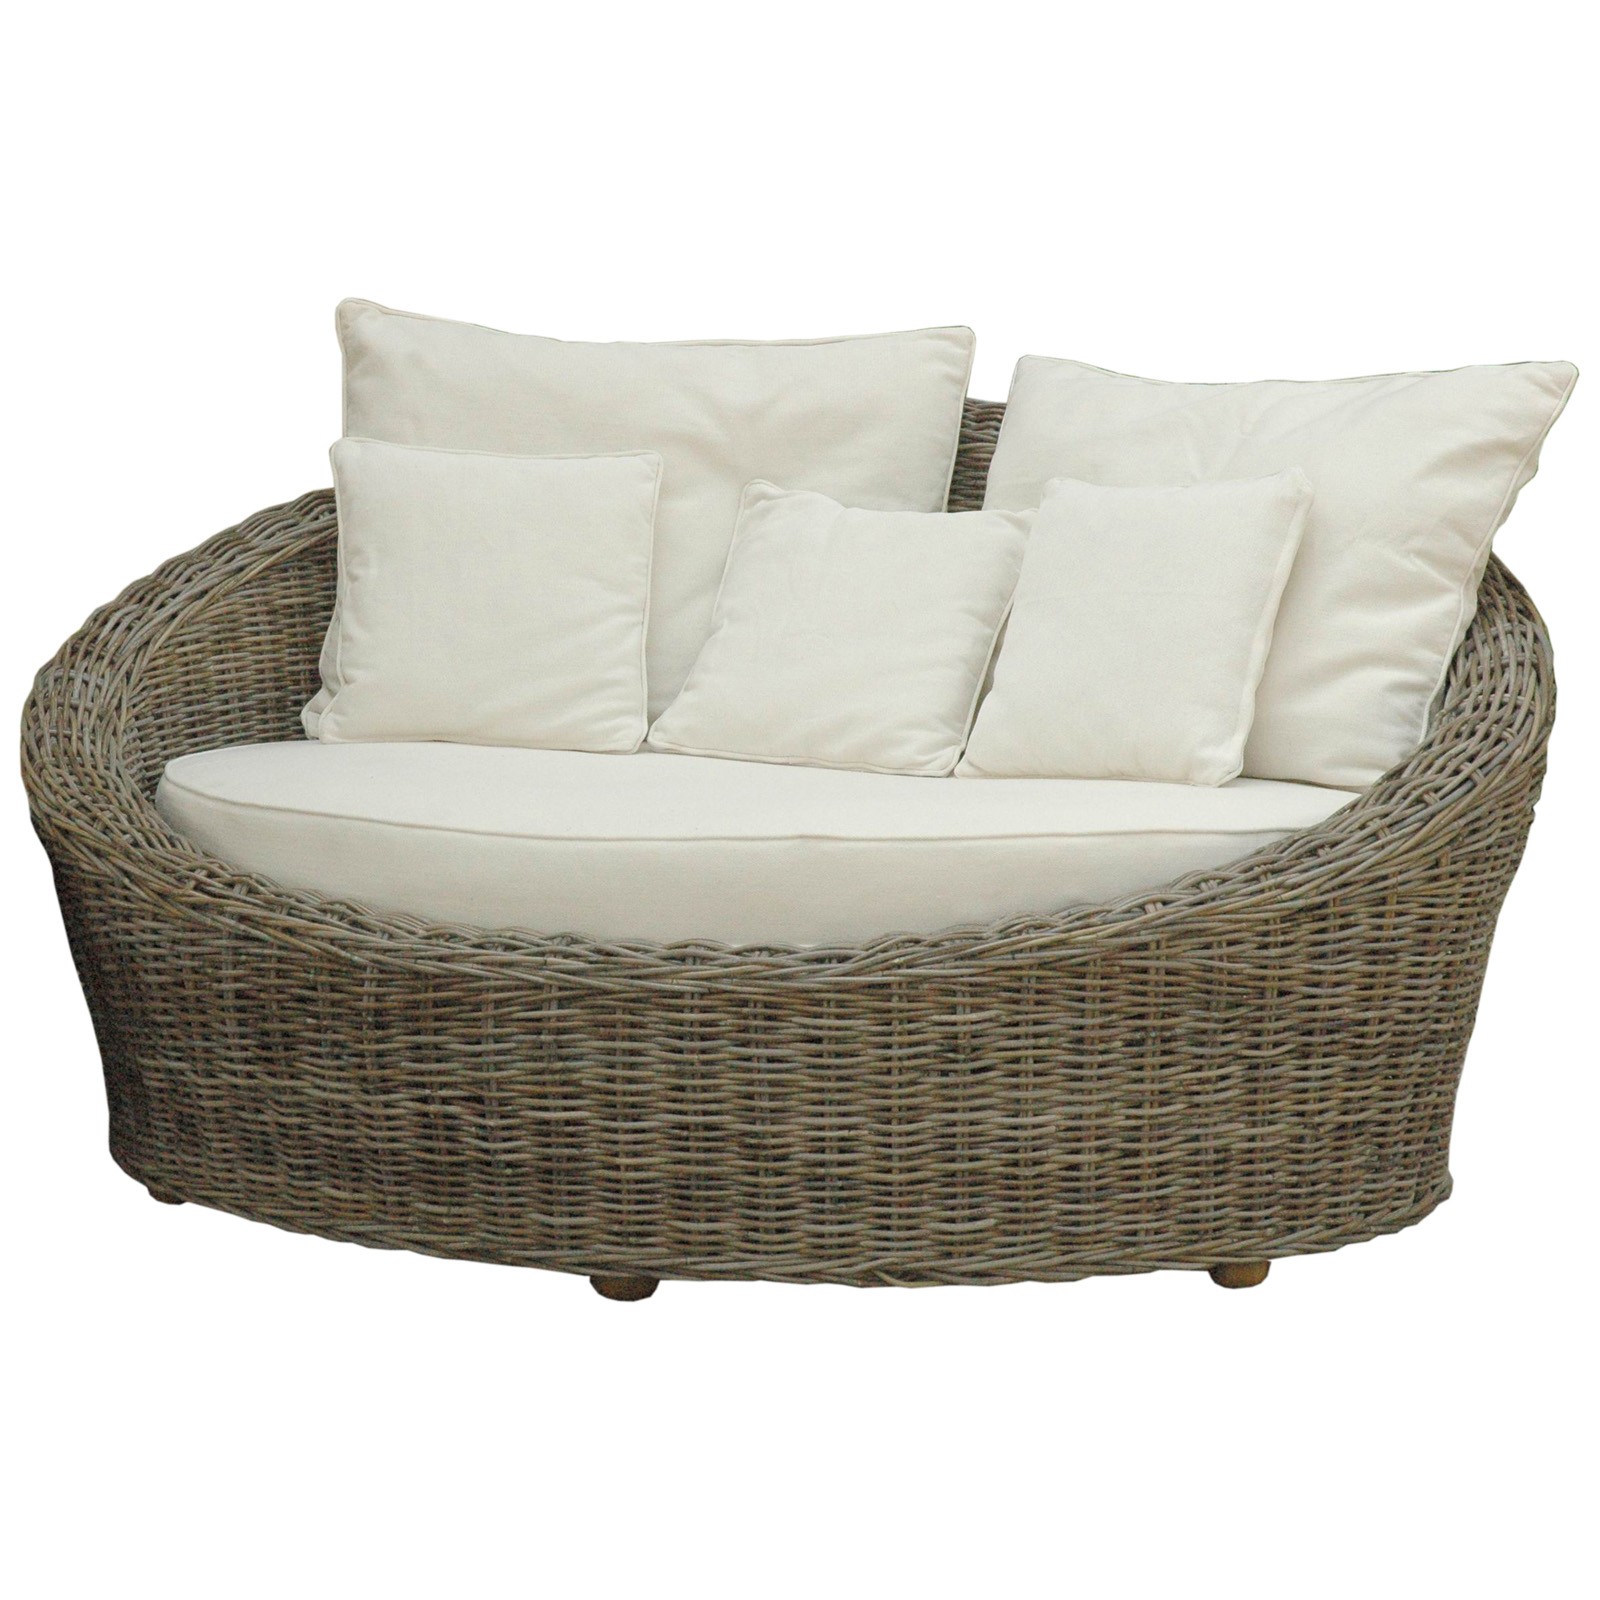 Oval wicker daybed at hayneedle